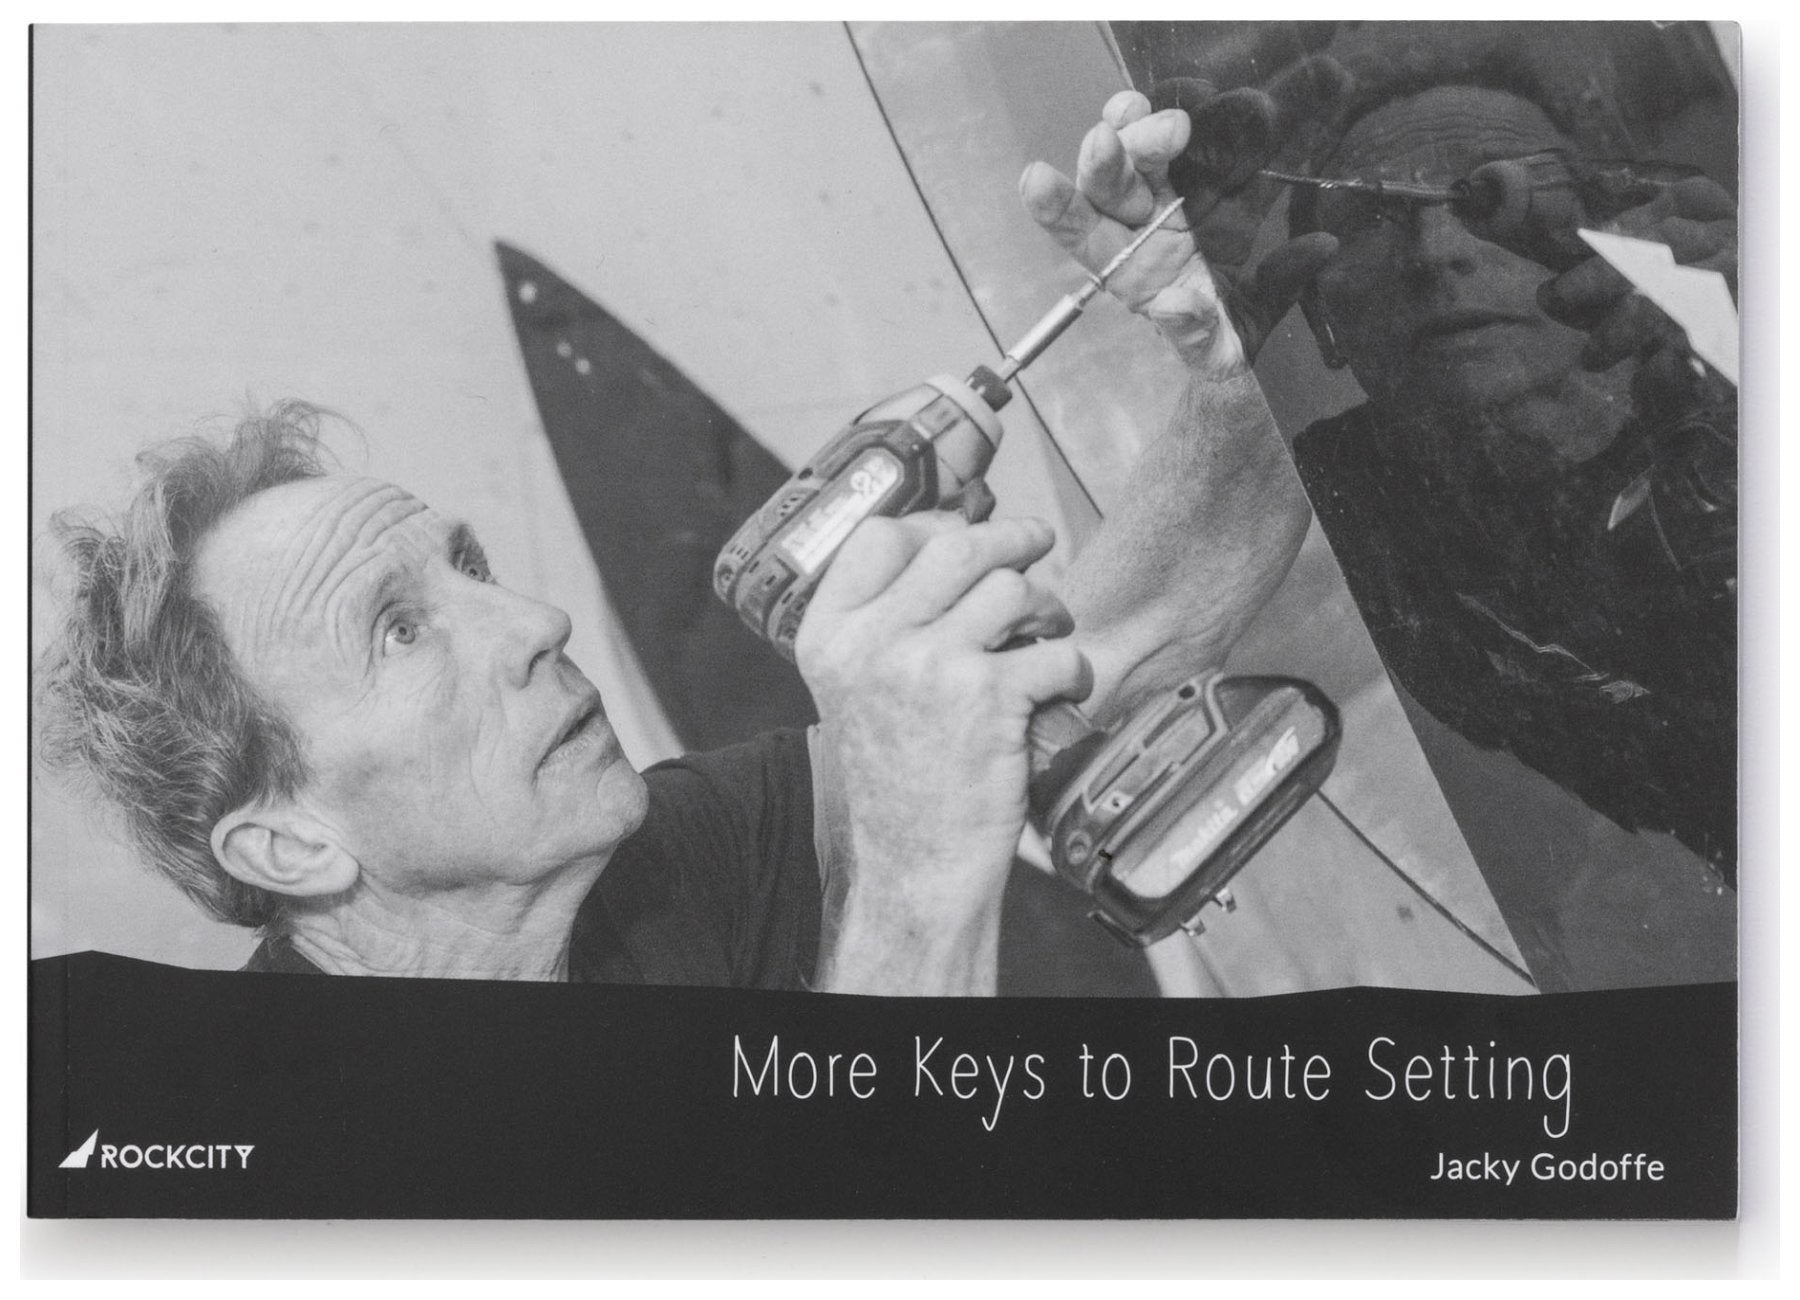 More Keys to Route Setting, routebouwboek